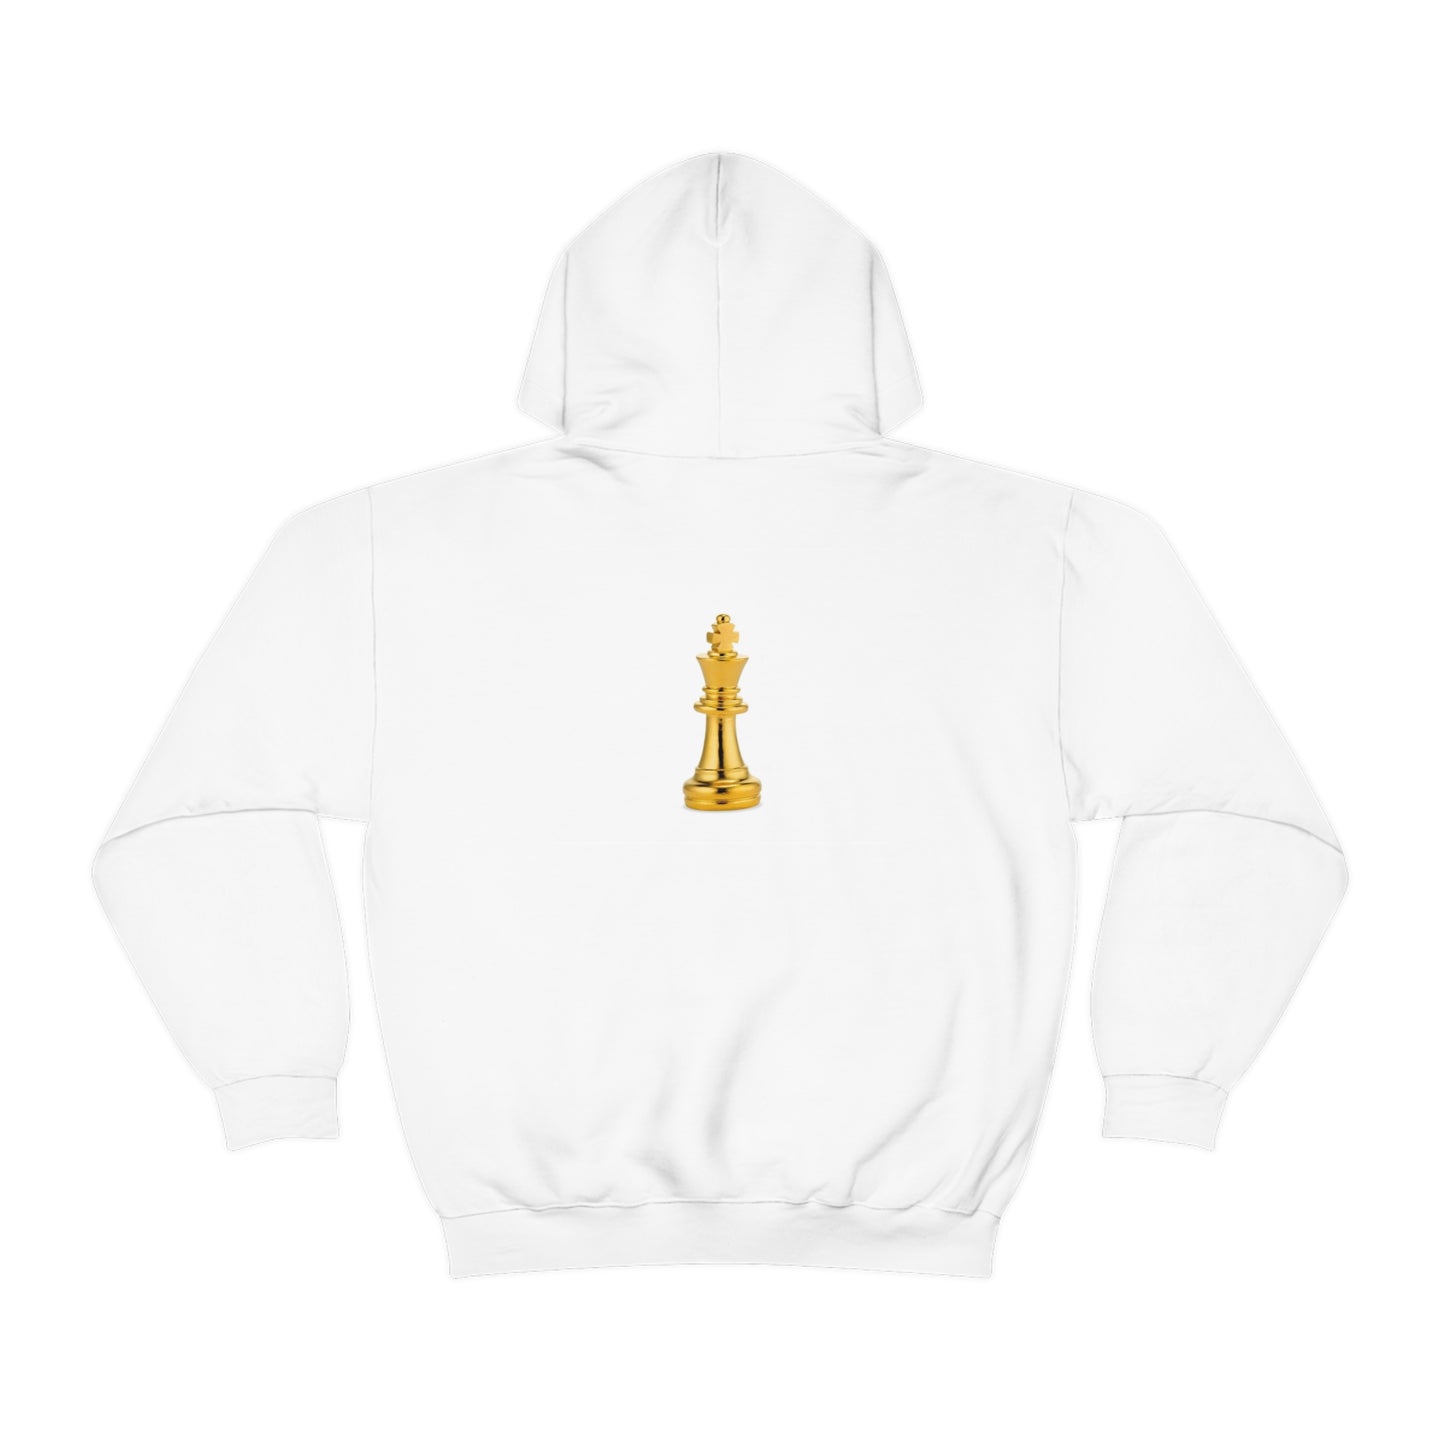 Need You 2 Hate Chess Not Checkers! Blend™ Hooded Sweatshirt